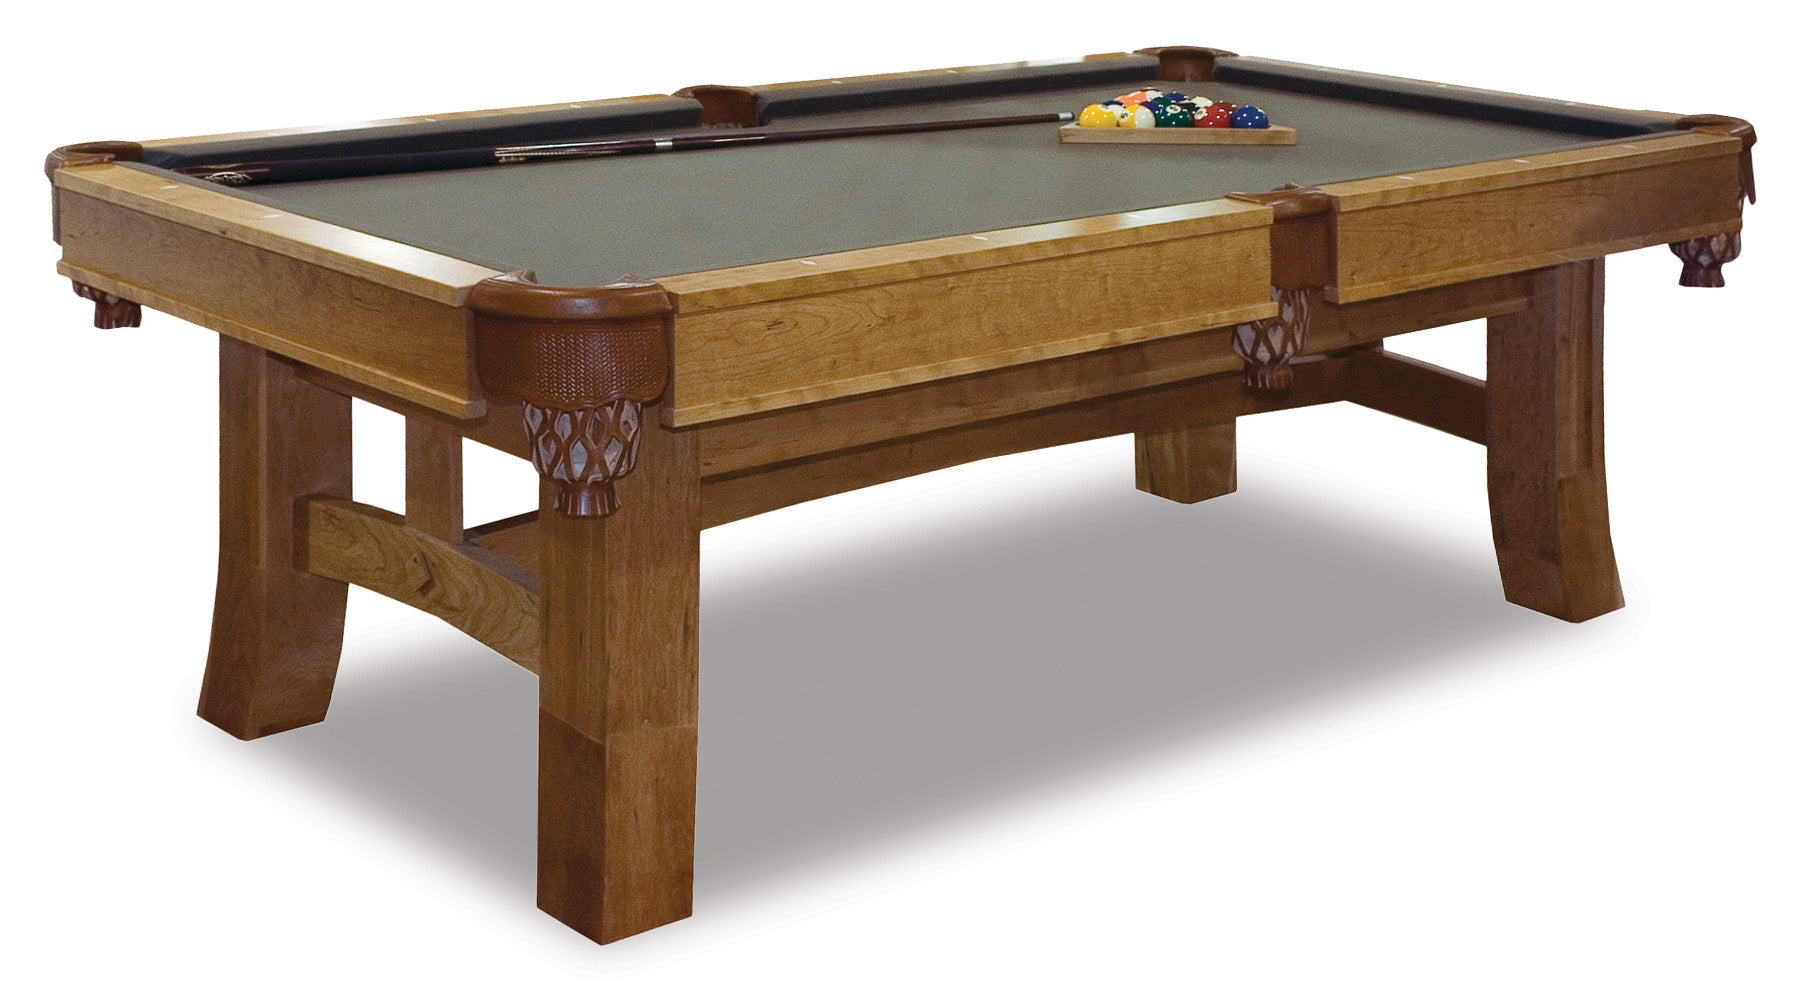 7' Hand-crafted Shaker Hill Pool Table (Cherry)